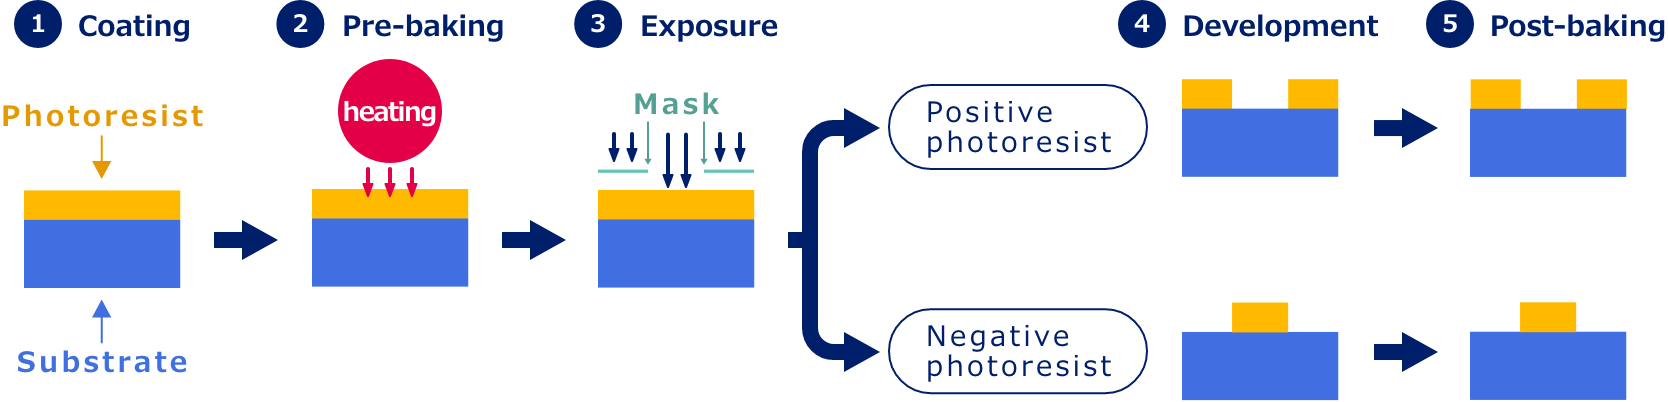 In the photolithography process, the photoresist is applied on the wafer, followed by pre-baking (evaporation of solvent by heating), exposure to UV light irradiation via the patterned photomask, development, post-baking (improvement in adhesion) to complete the pattern transfer. The photosensitivity of the photoresist enables the exposure and development of fine patterns in photolithography. Photolithography is conducted in nanometer order in manufacturing semiconductors.